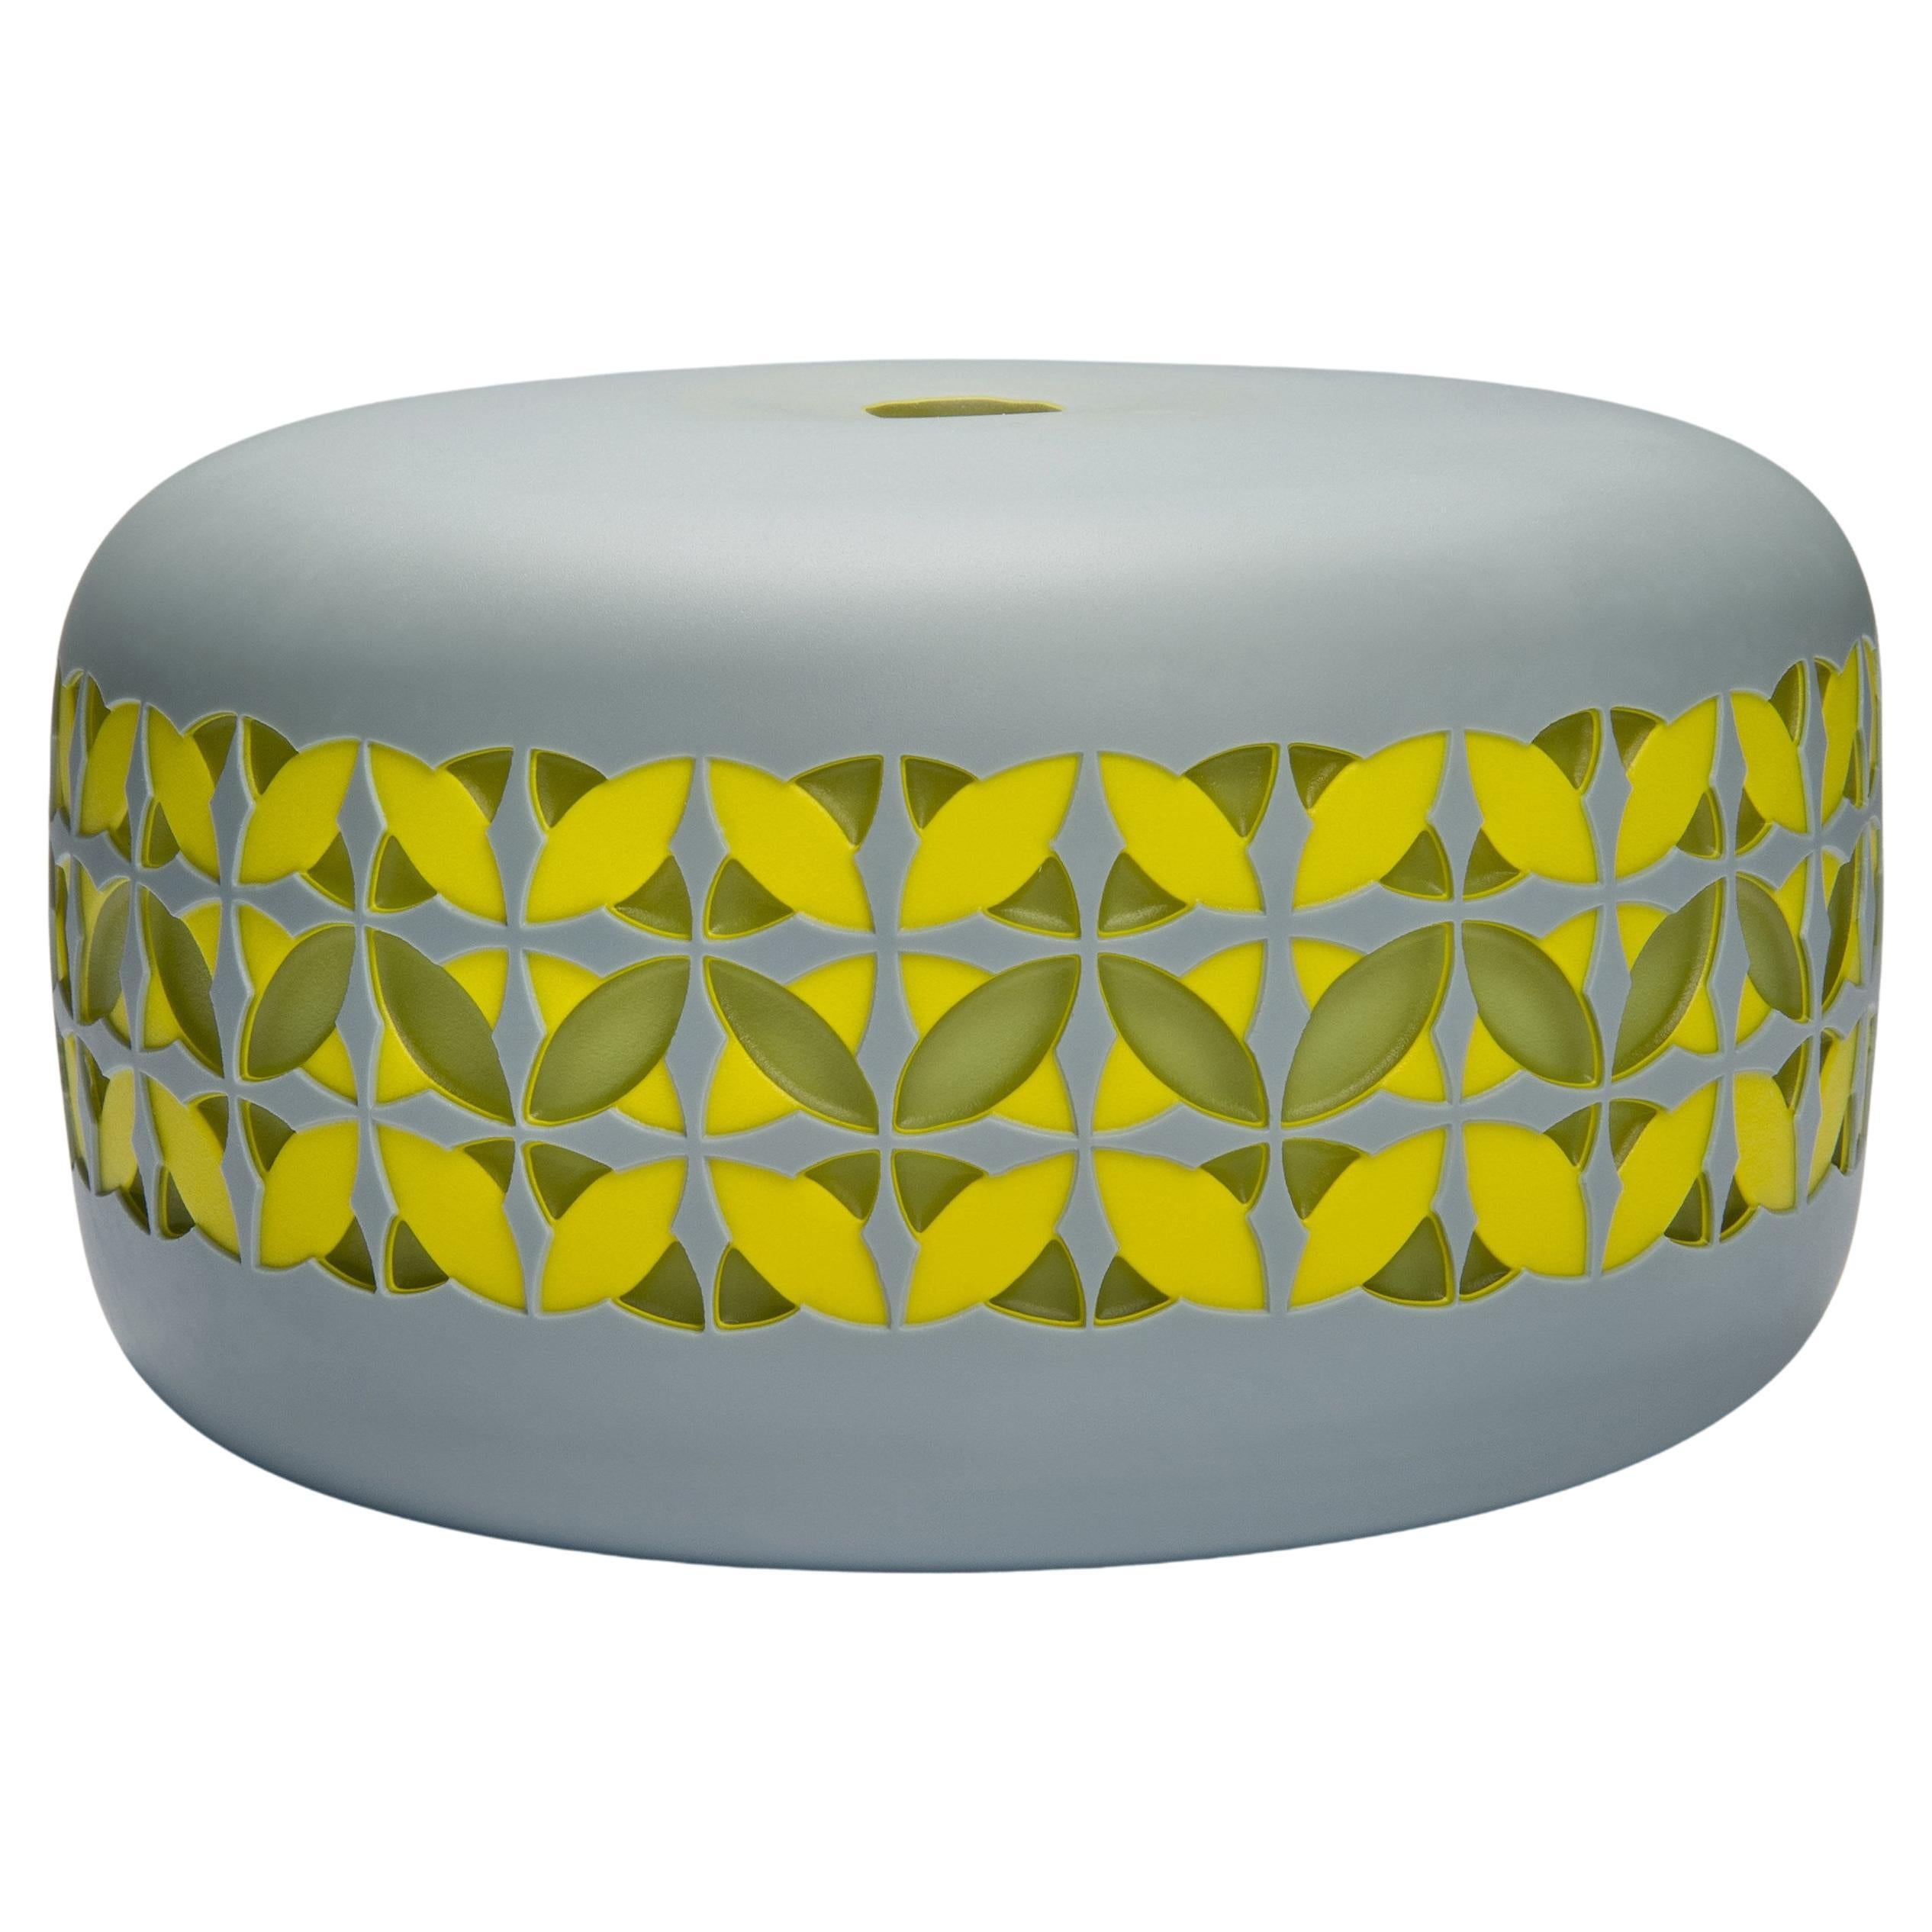 Going Round in Circles III, a Grey & Yellow Glass Artwork by Sarah Wiberley